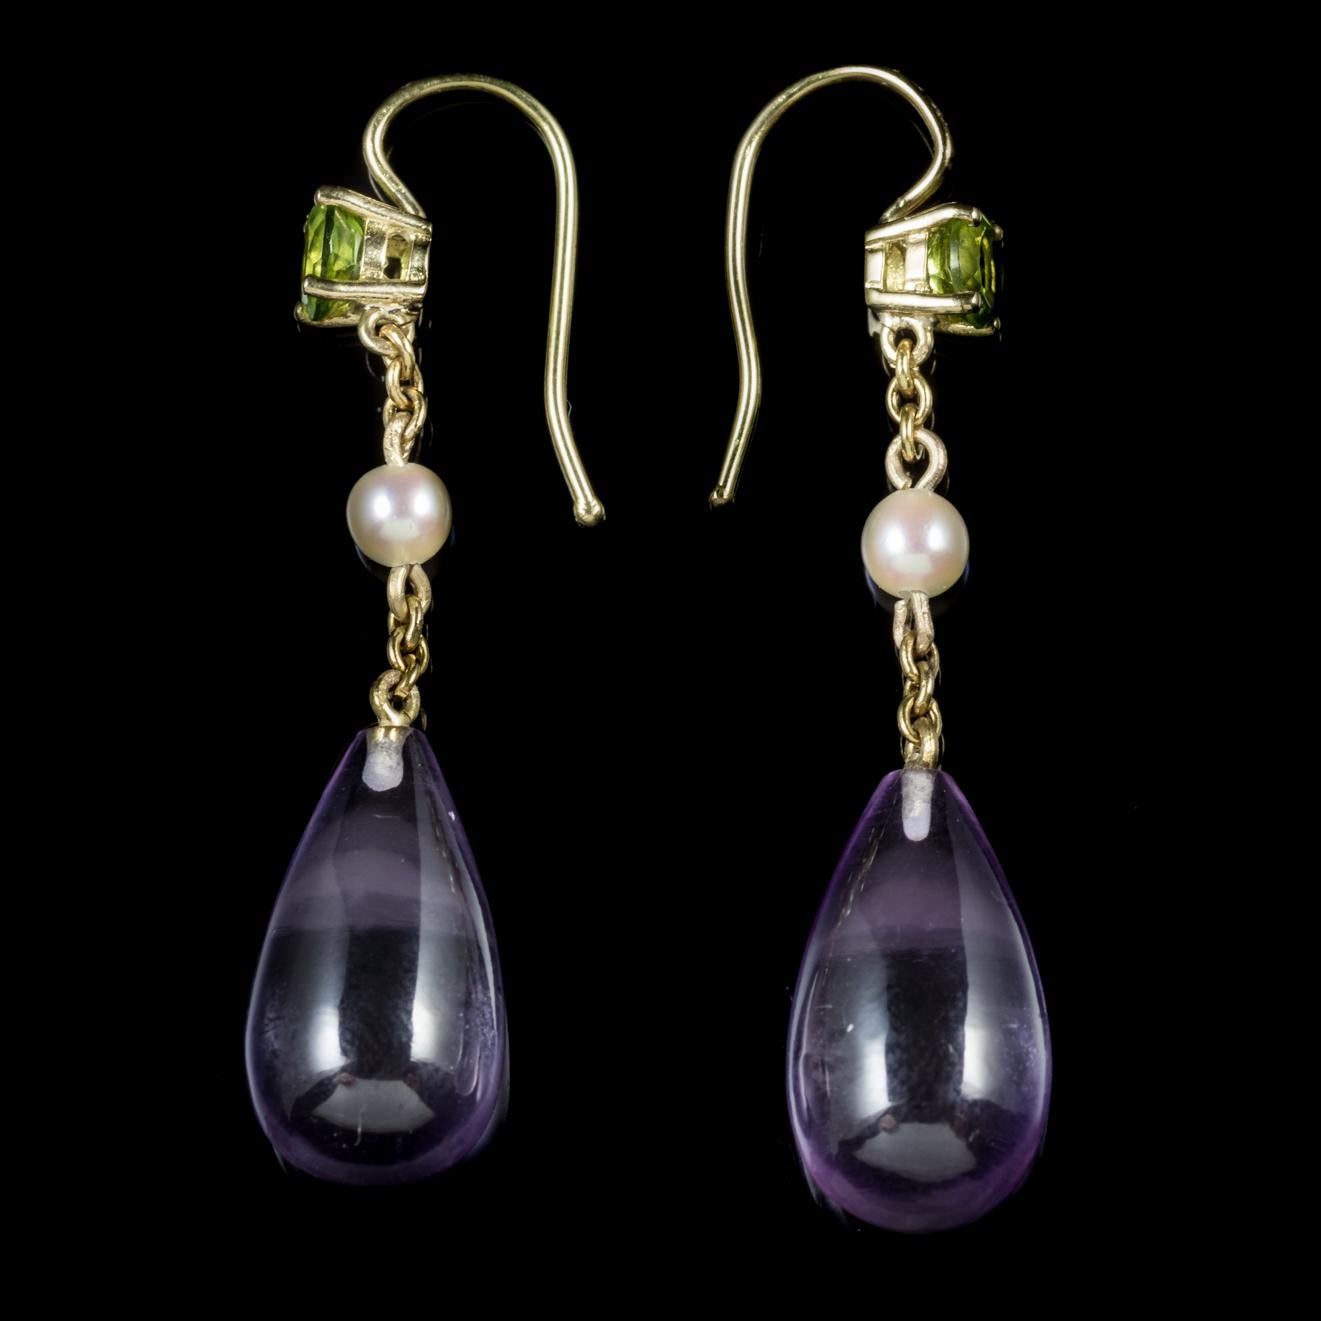 These fabulous antique Victorian Amethyst drop earrings were made representing the Suffragette movement, Circa 1900.

Suffragettes liked to be depicted as feminine, their jewellery popularly consisted of Violet, Green and White colours which were